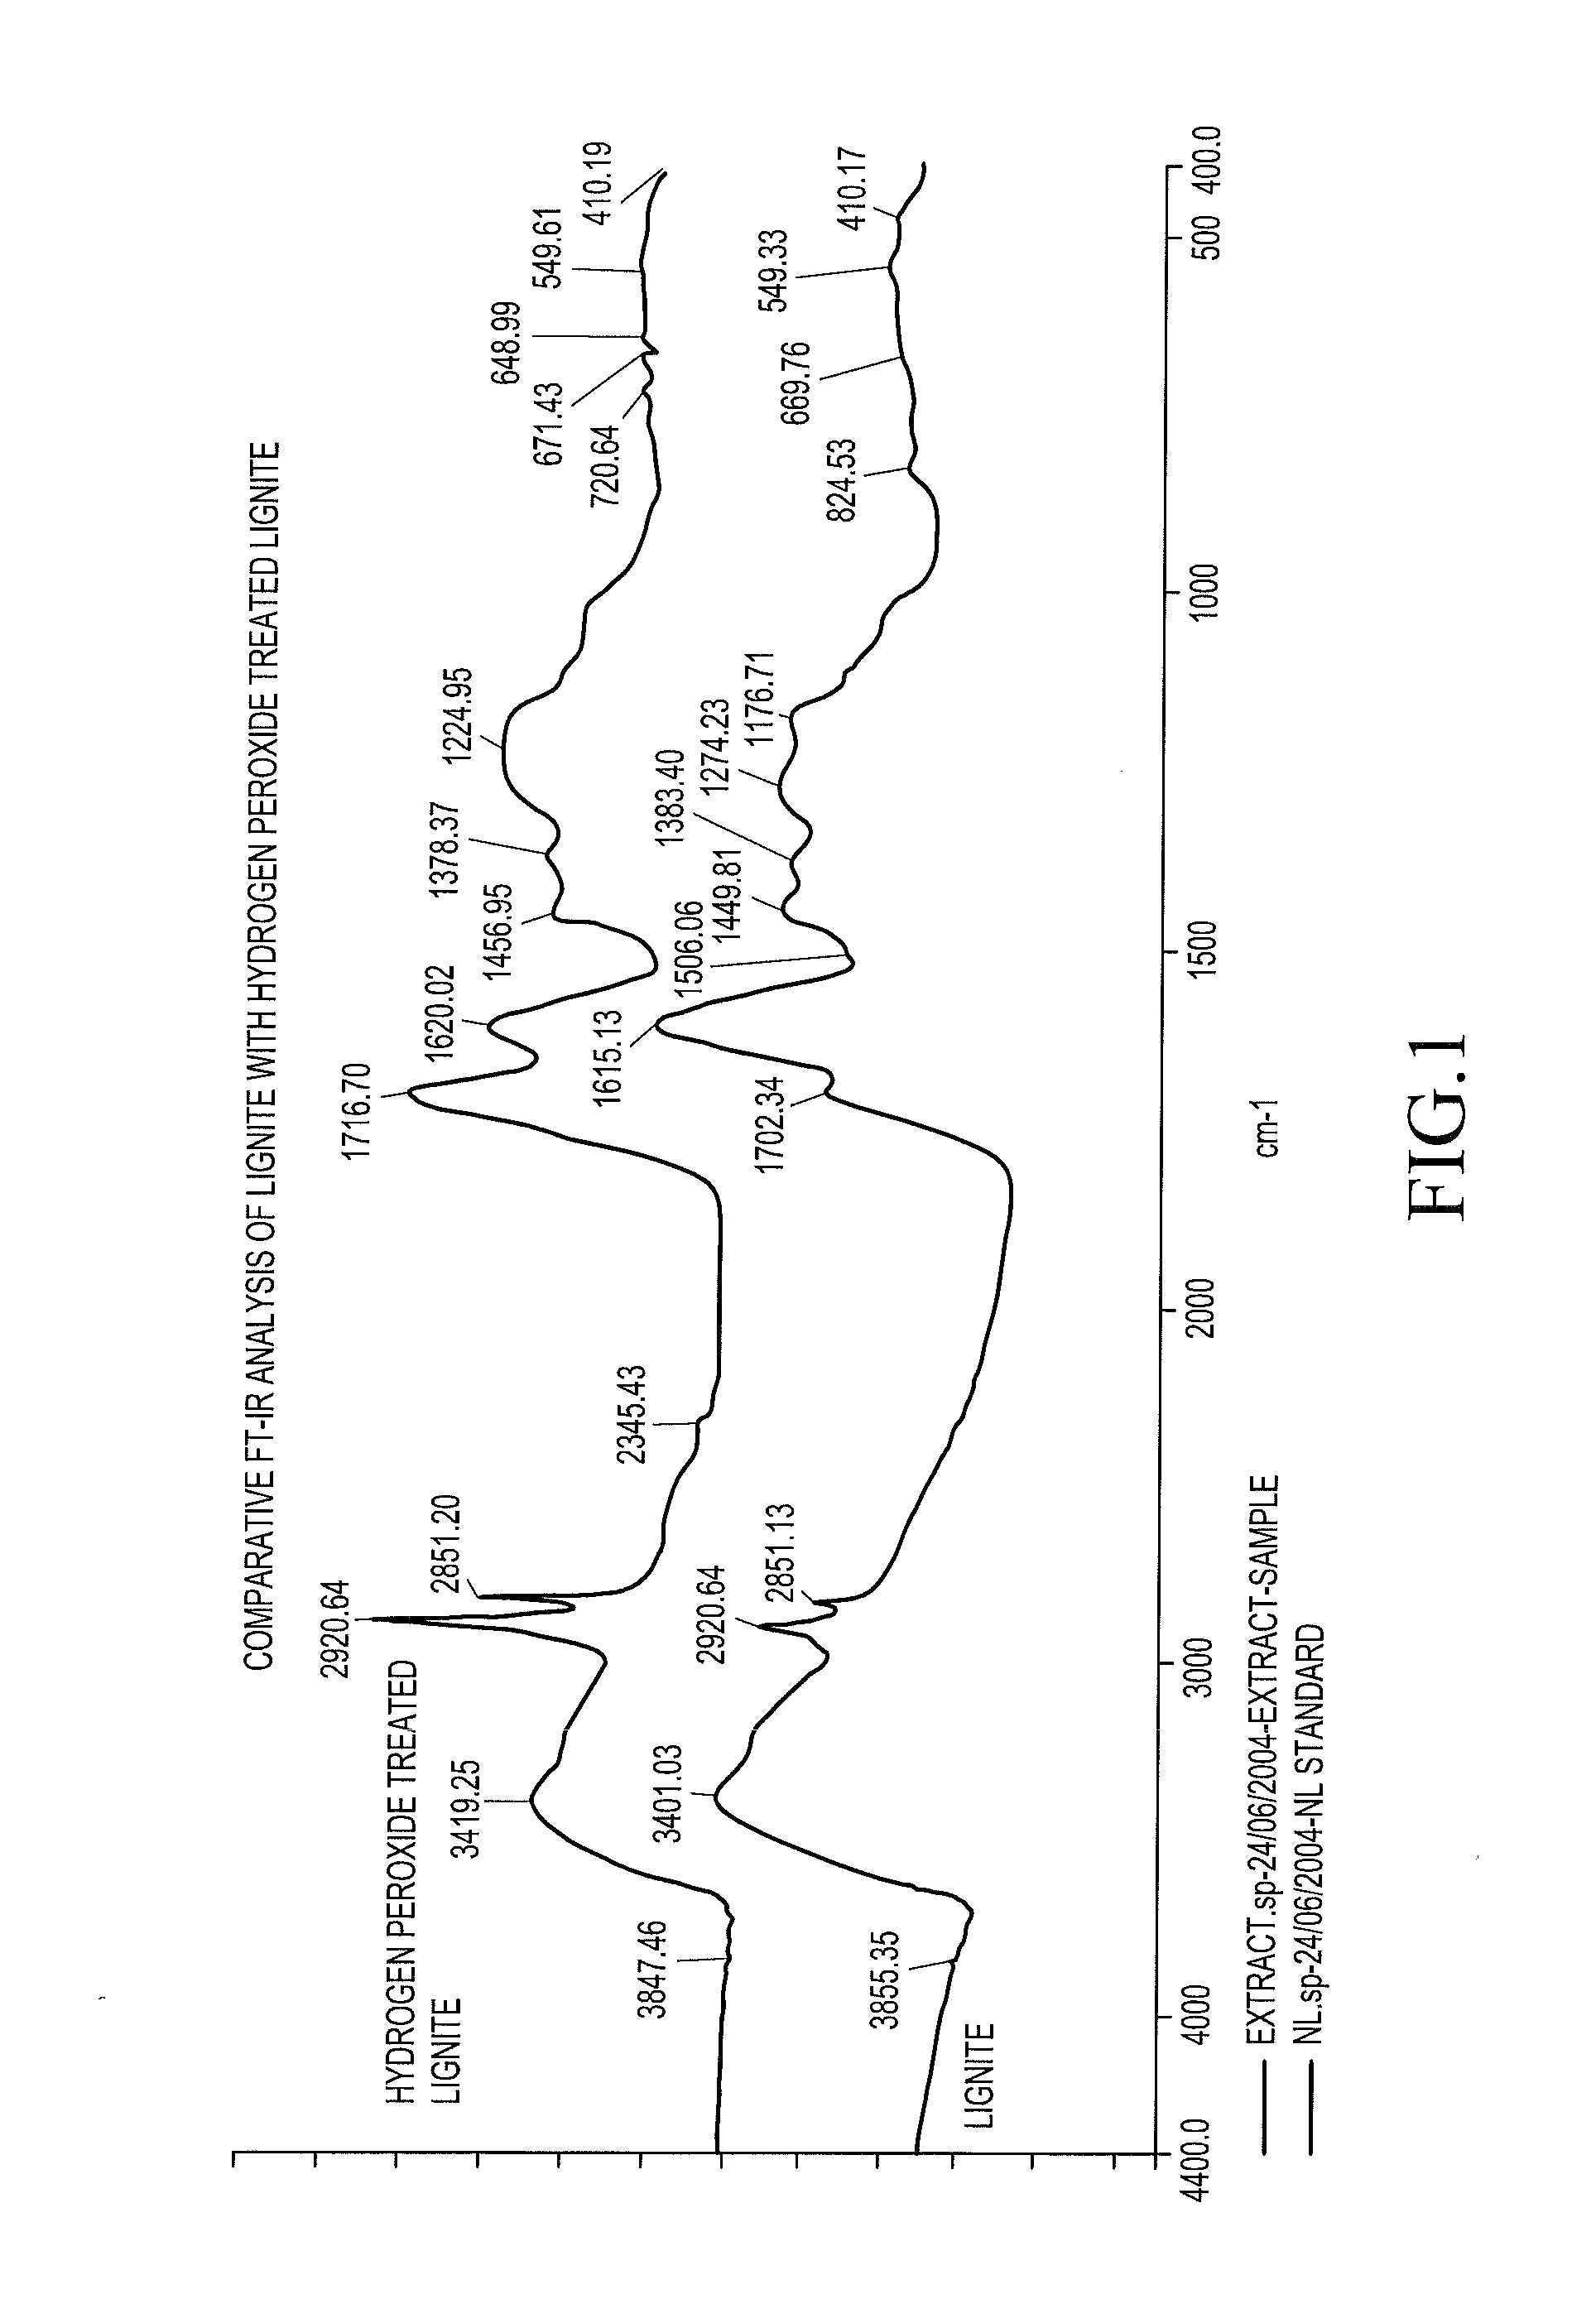 Structurally modified lignite with or without extraction of functionality enhanced organic molecules